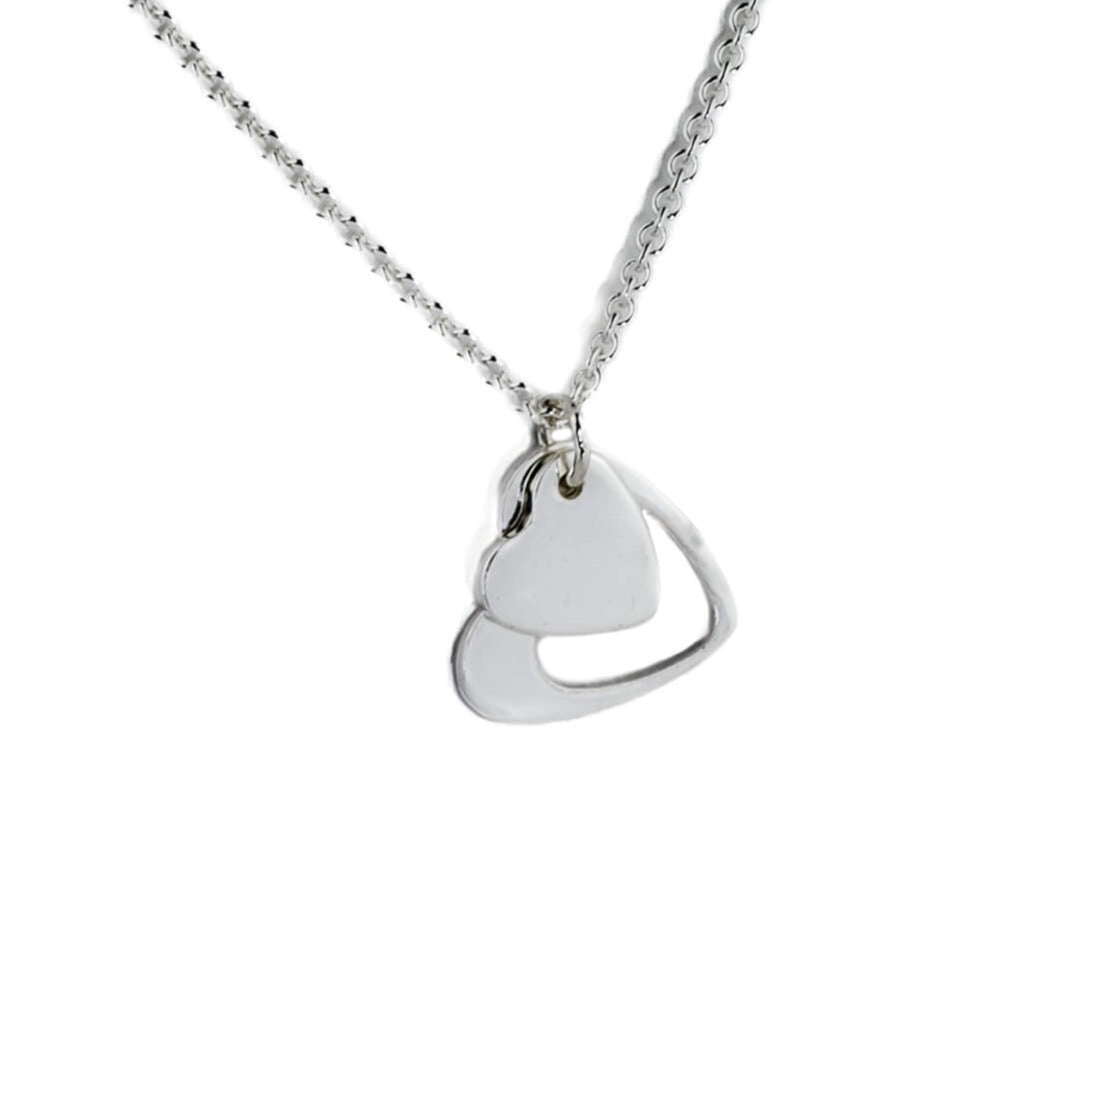 Two hearts pendant necklace sterling silver